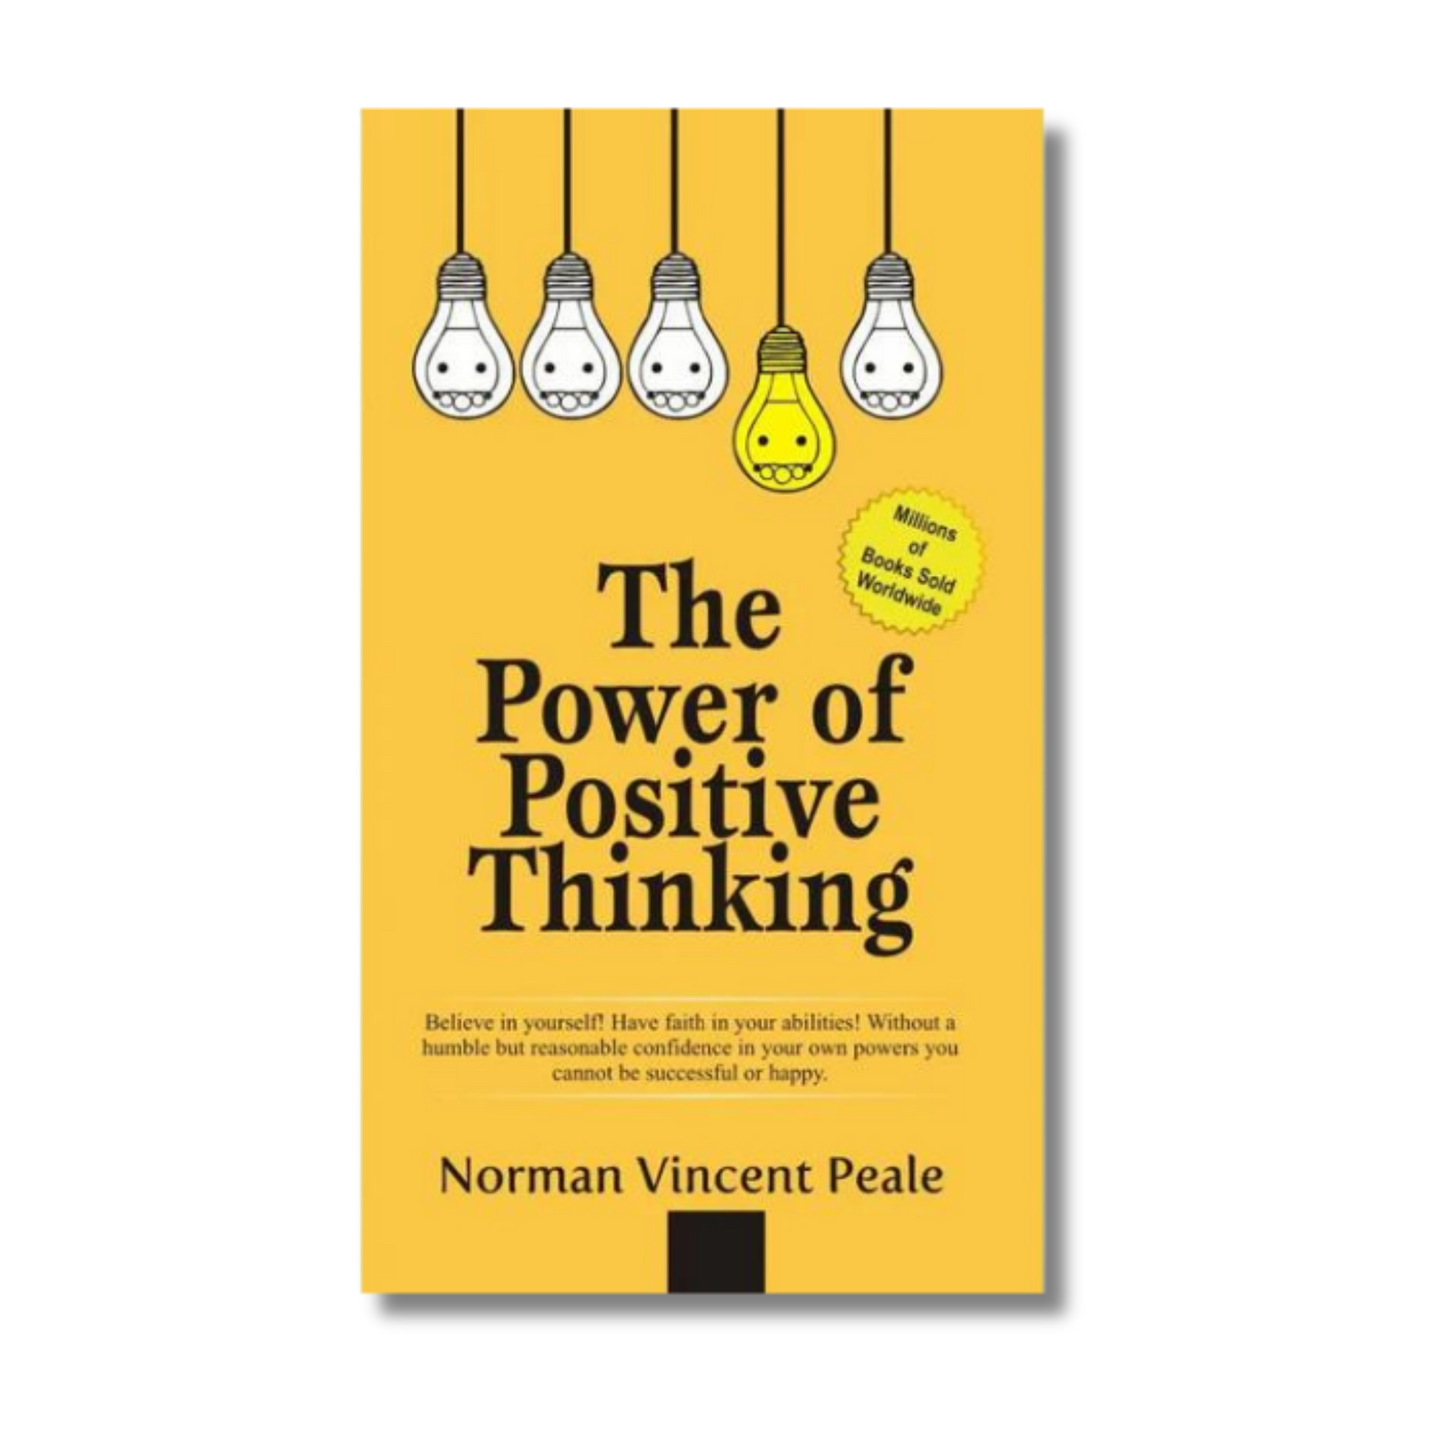 The Power Of Positive Thinking by Norman Vincent Peale (Paperback)